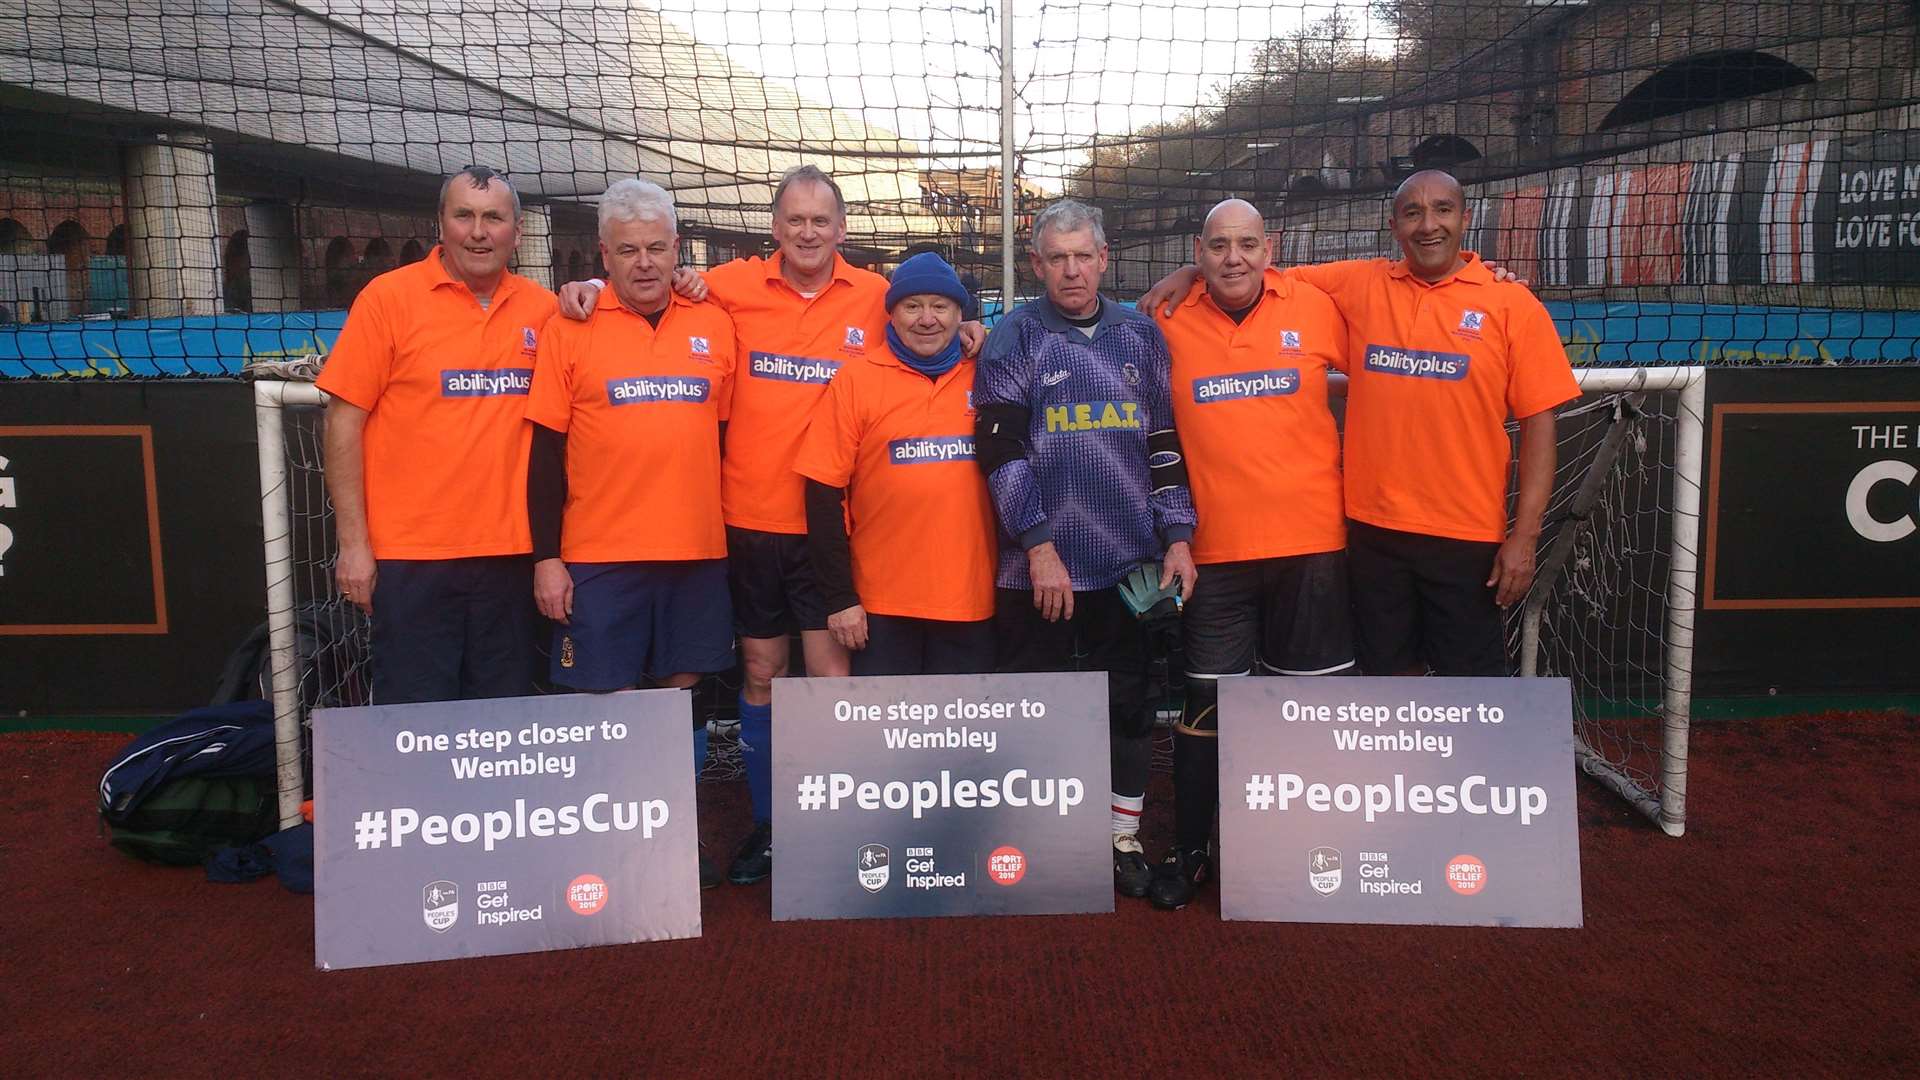 Medway Marauders 'walking football' team are through to the national finals of the People's FA Cup